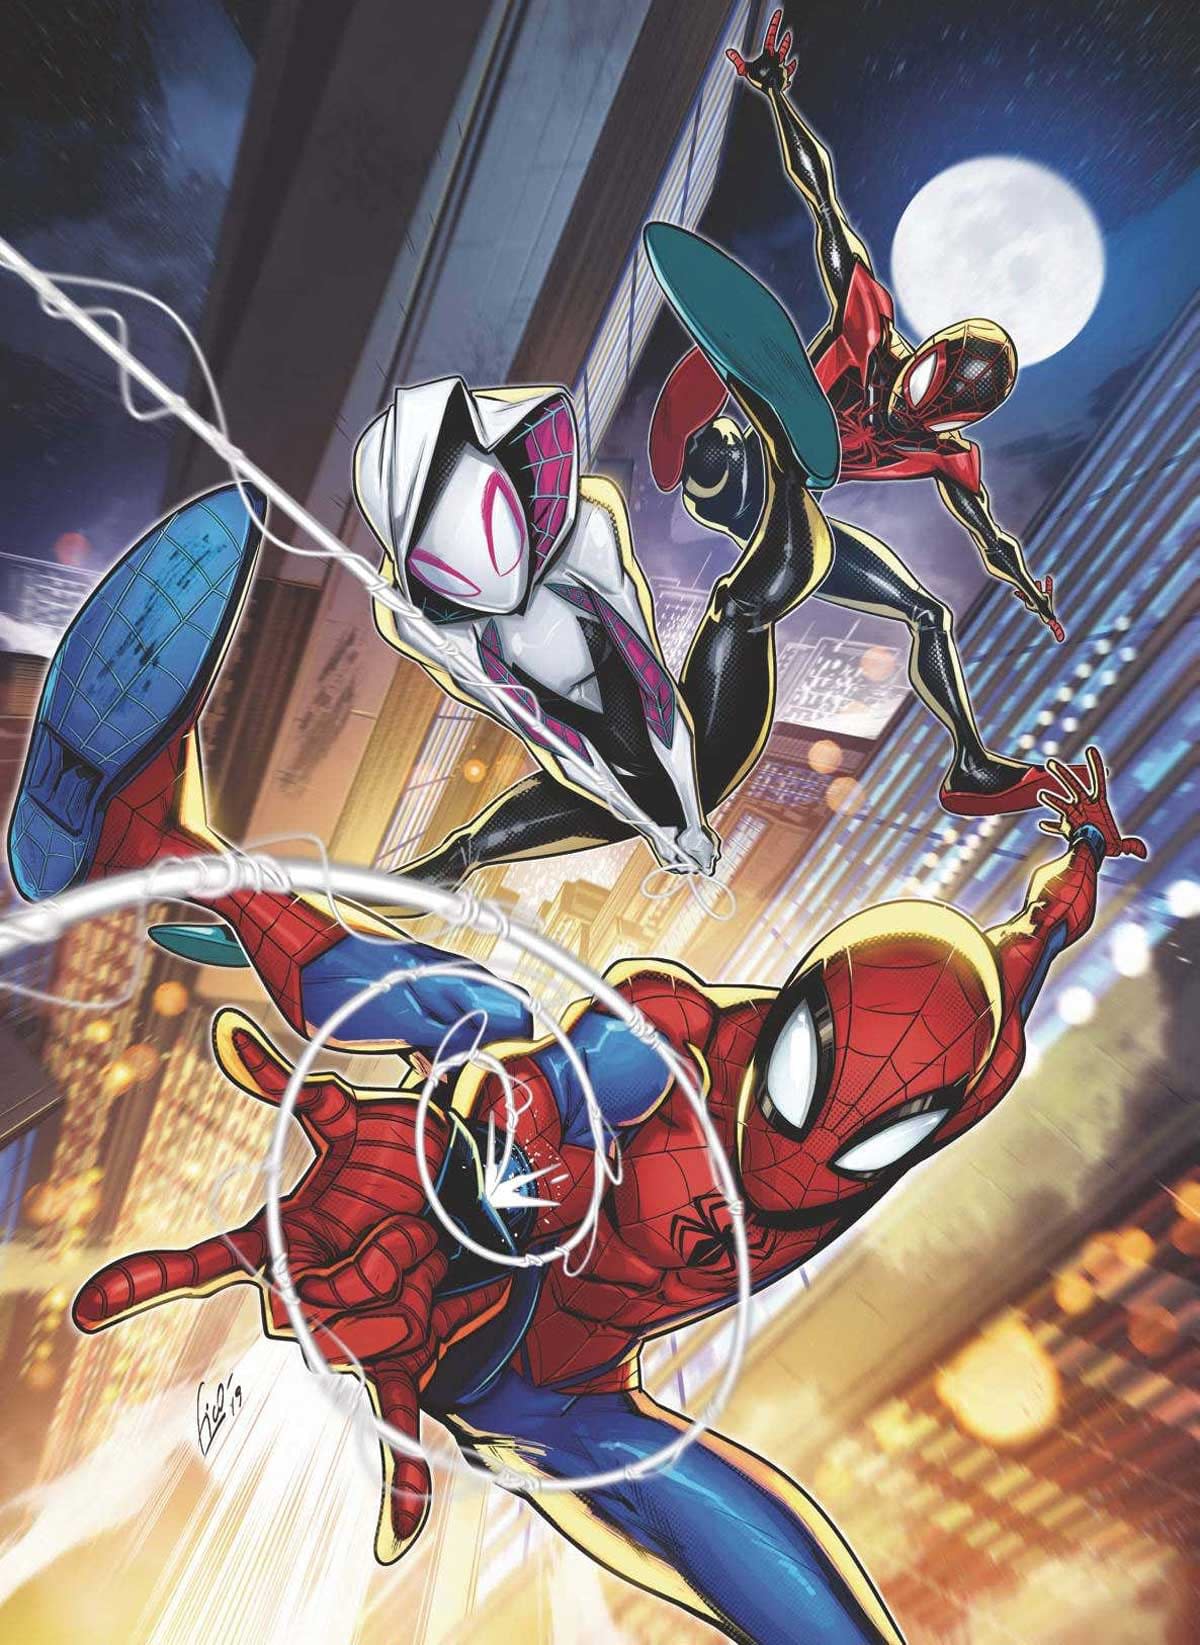 REVIEW: Marvel Action Spider-Man Volume 2 #1 - "Wall-To-Wallcrawler Action"